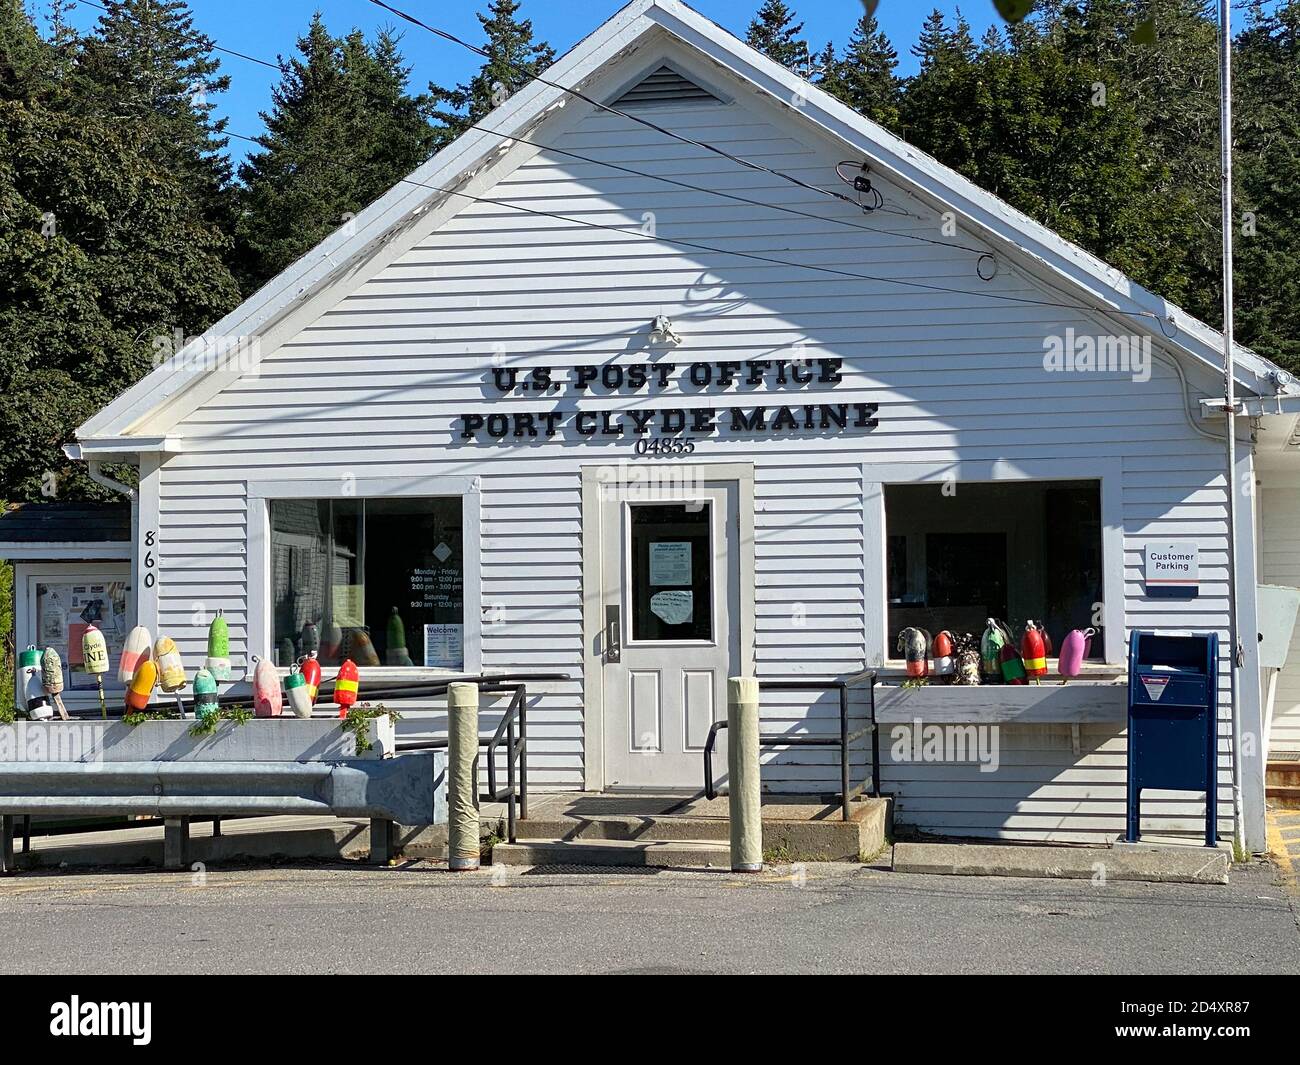 Post Office Building with Buoys, Port Clyde, Maine, USA Stock Photo